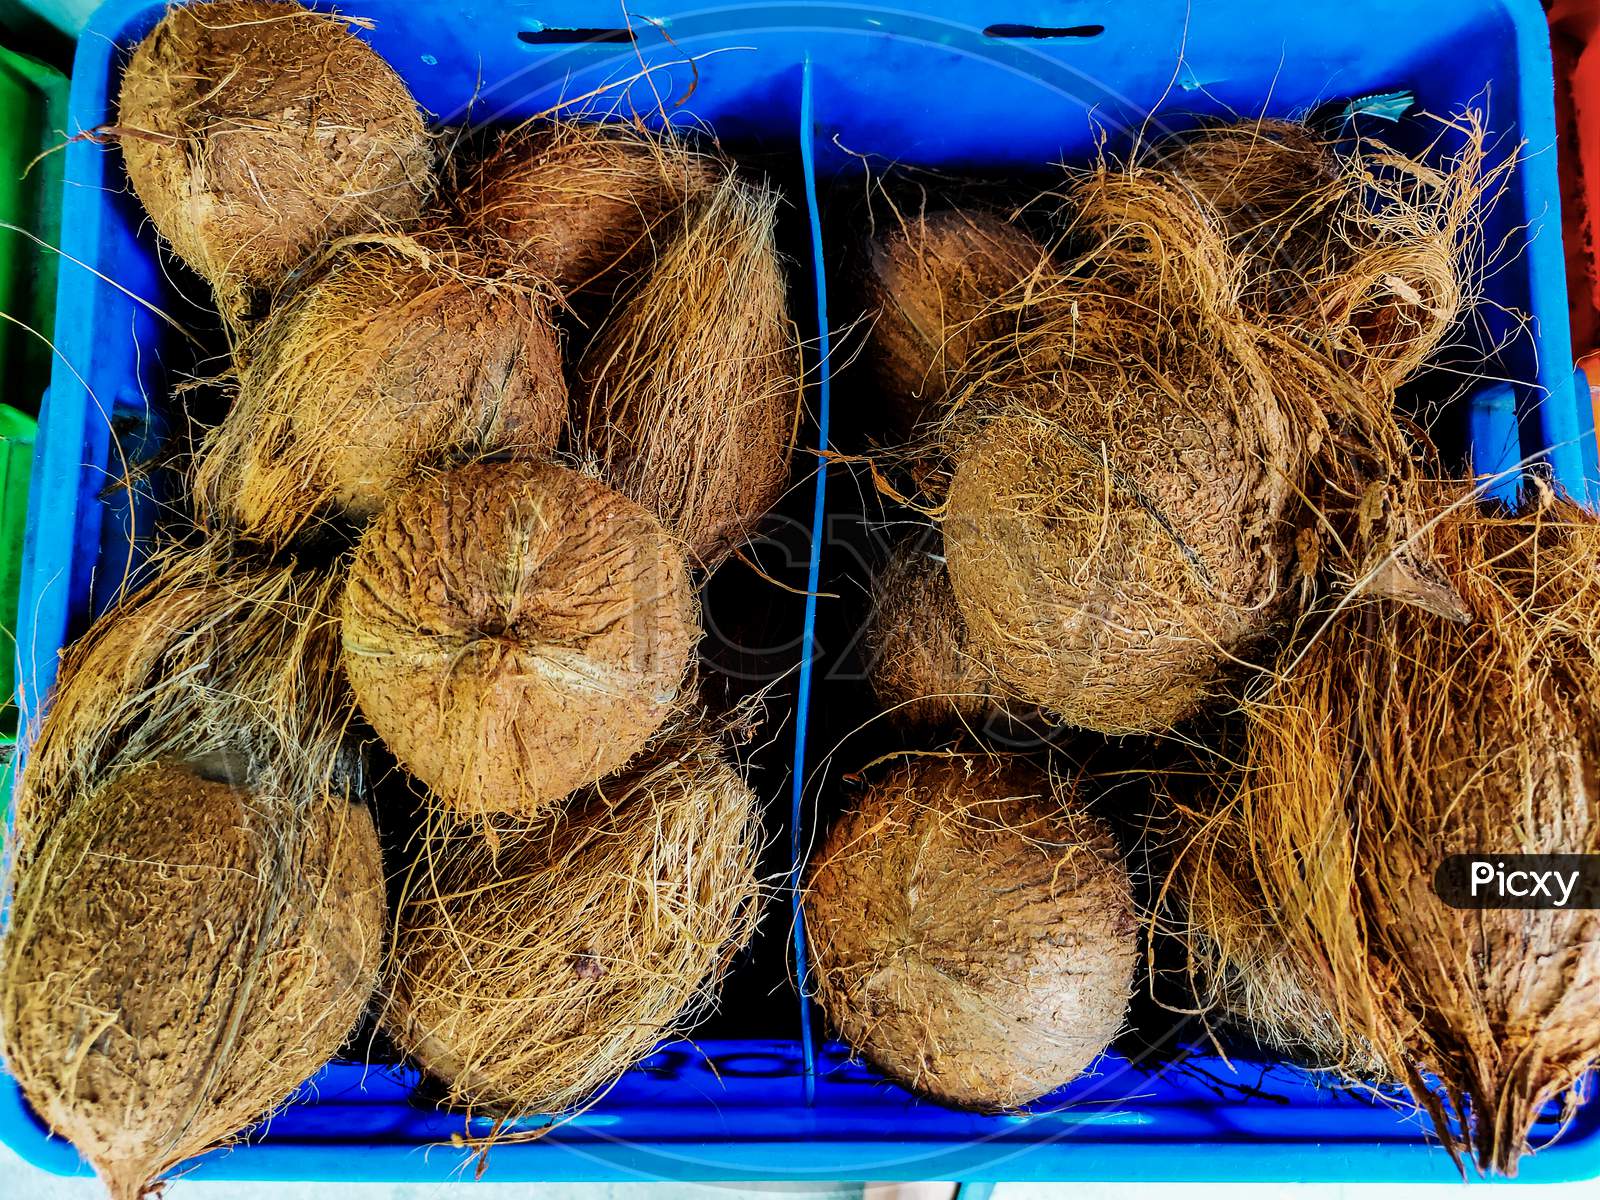 Picture Of Raw Peeled Brown Coconut Placed In A Blue Kart For Sales In India